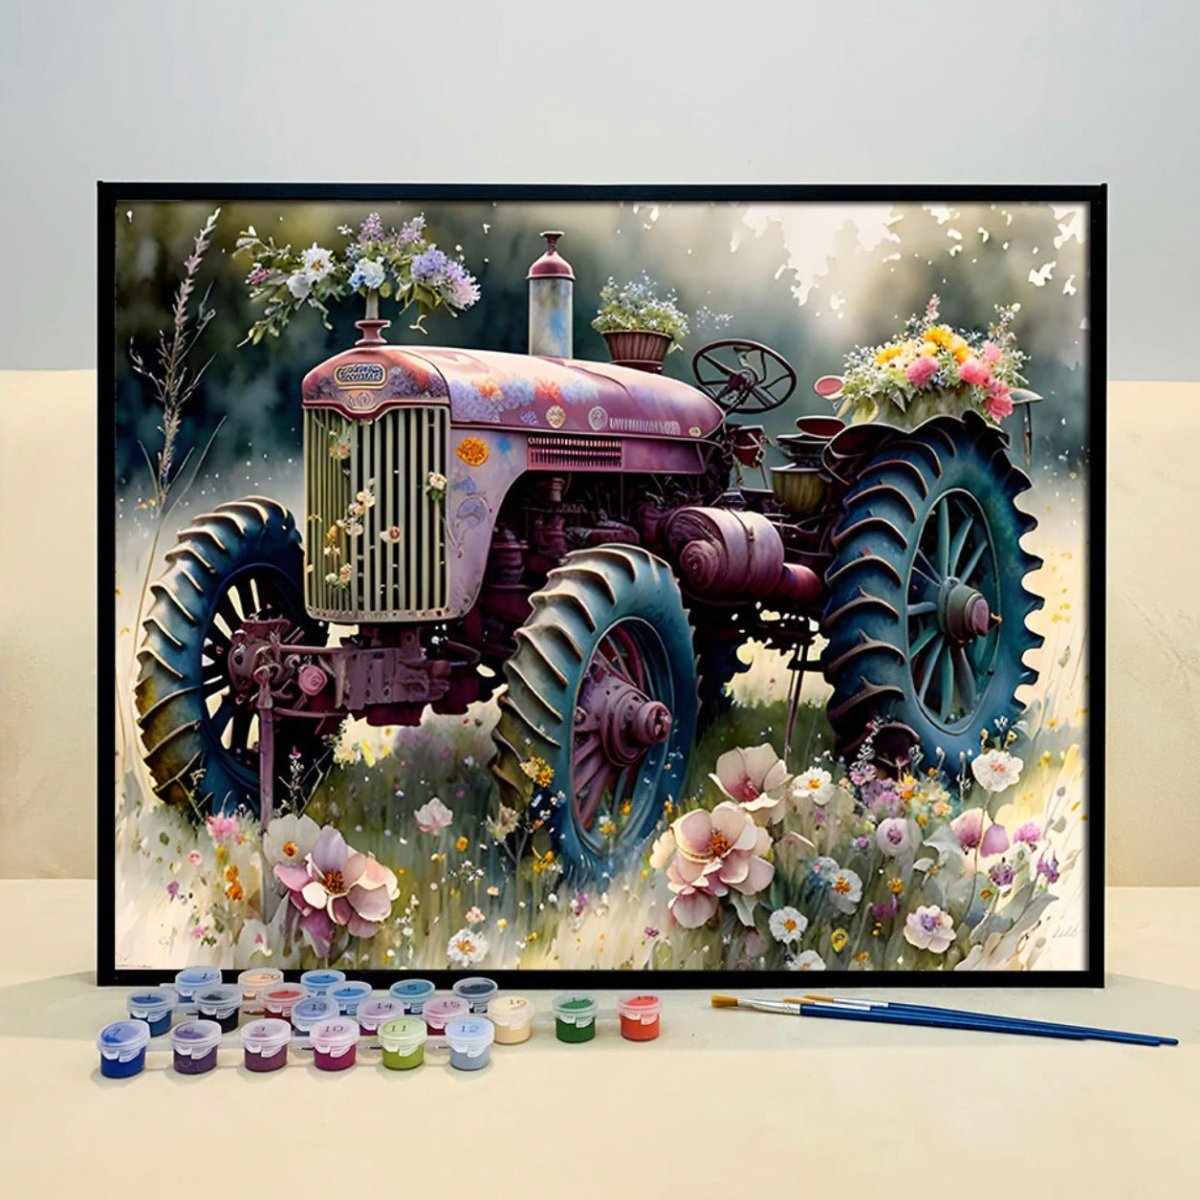 Nostalgic Serenity: Rekindle Fond Memories and Find Inner Peace with ArtVibe™ DIY Painting By Numbers (EXCLUSIVE) - Pink Tractor (16"x20"/40x50cm) - ArtVibe Paint by Numbers